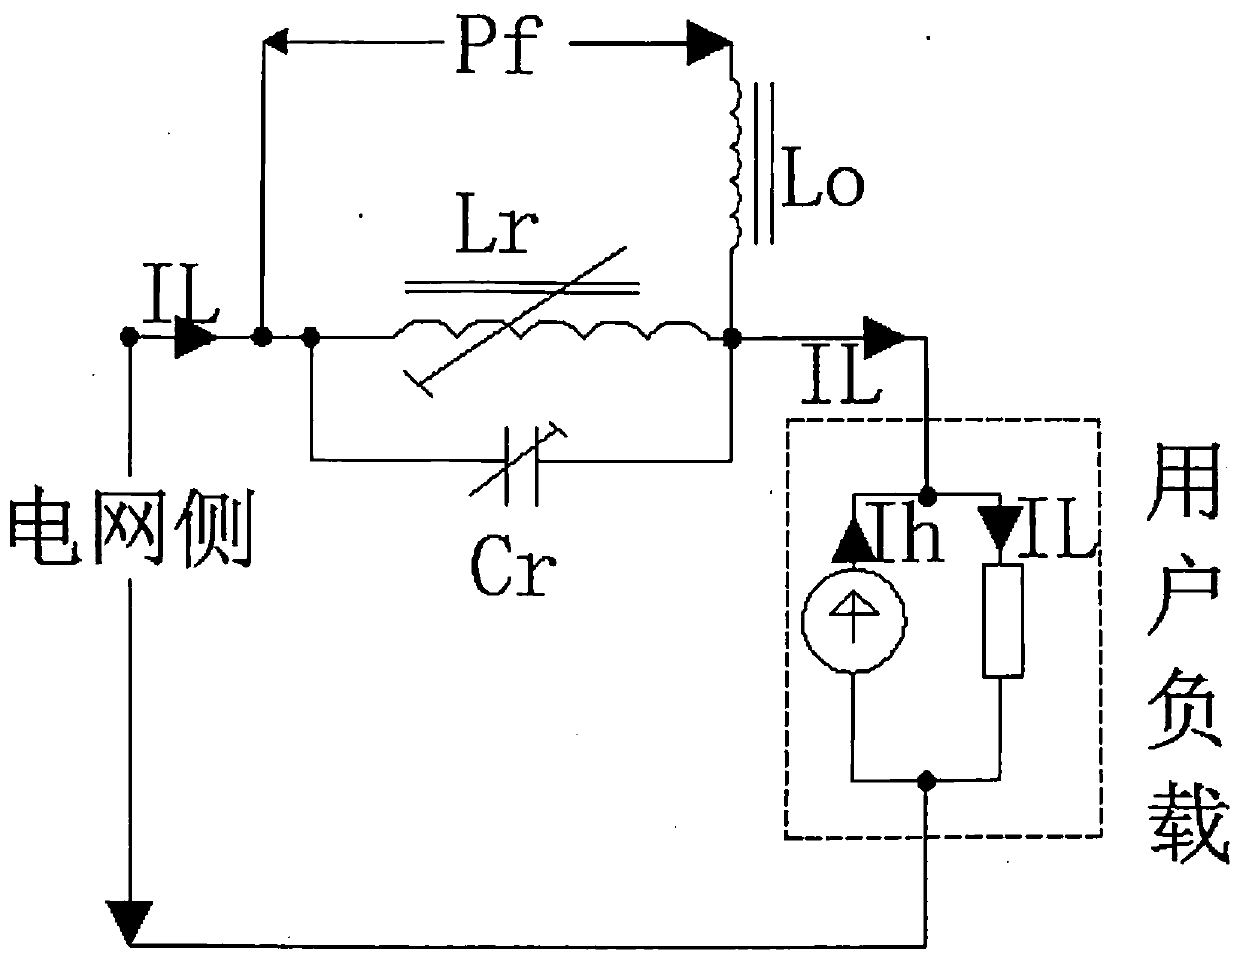 An effective method and circuit for realizing harmonic power conversion